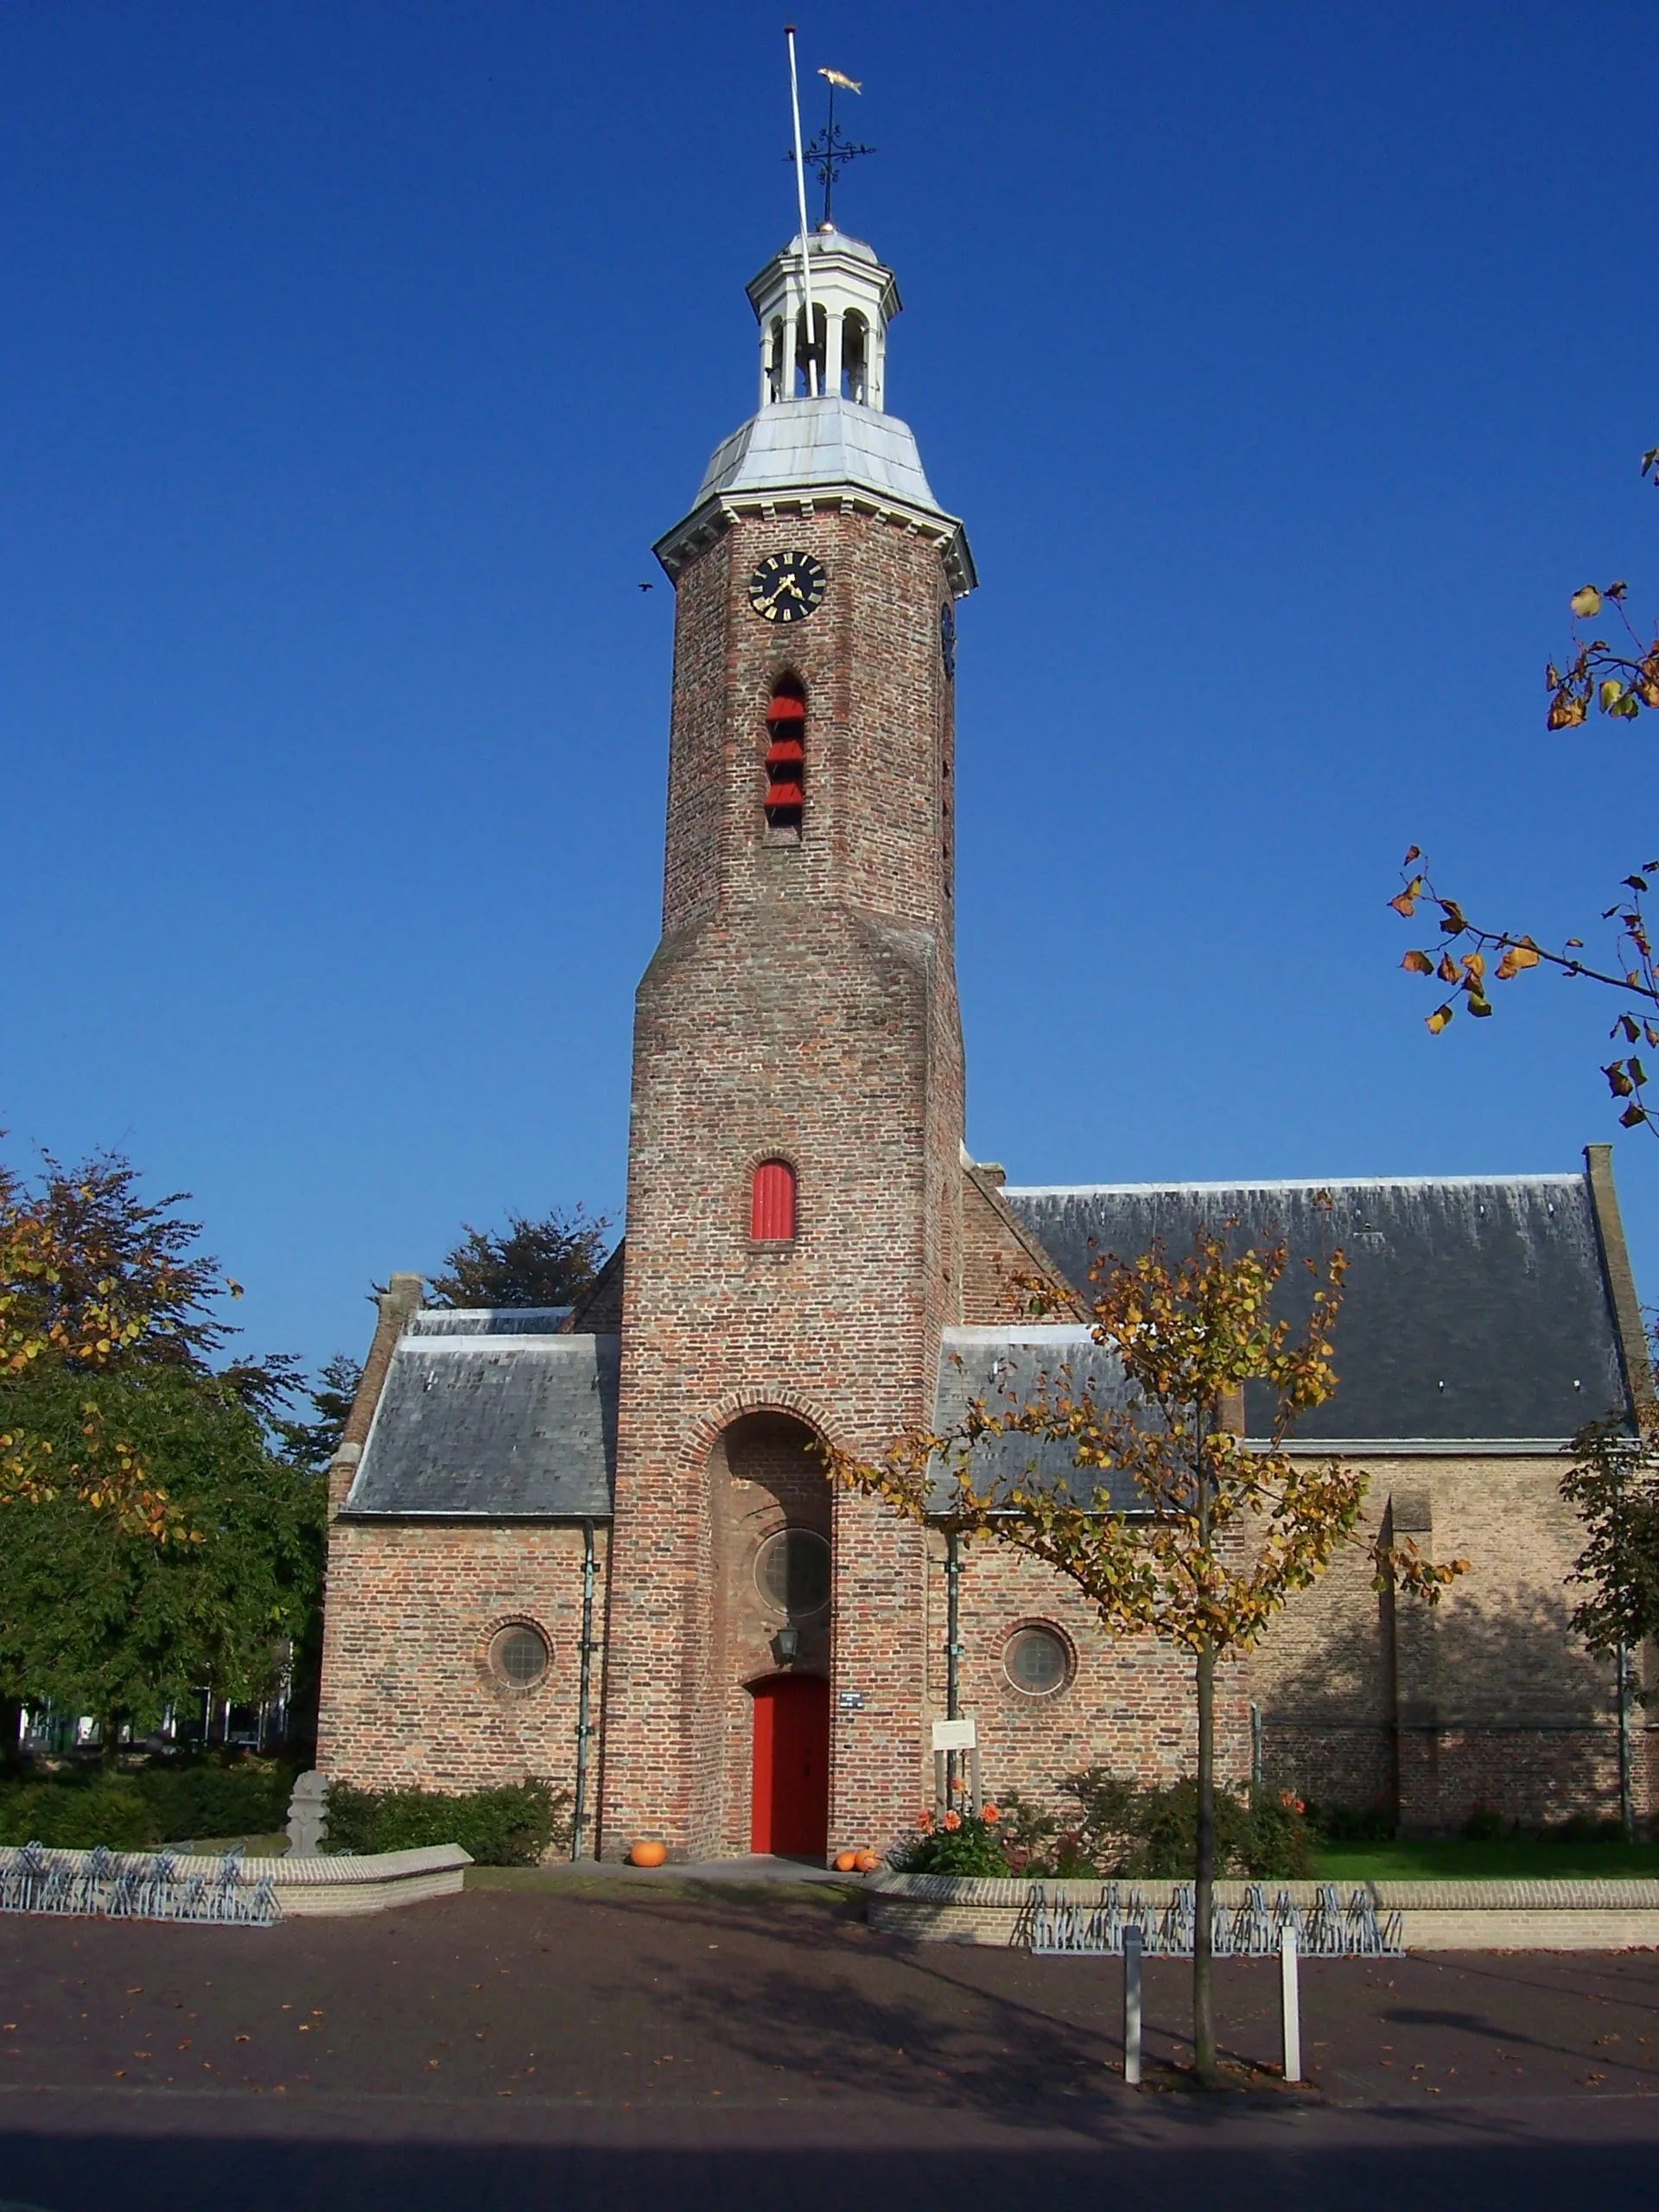 Photo showing: Church in s'Gravenpolder in the dutch province of Zeeland